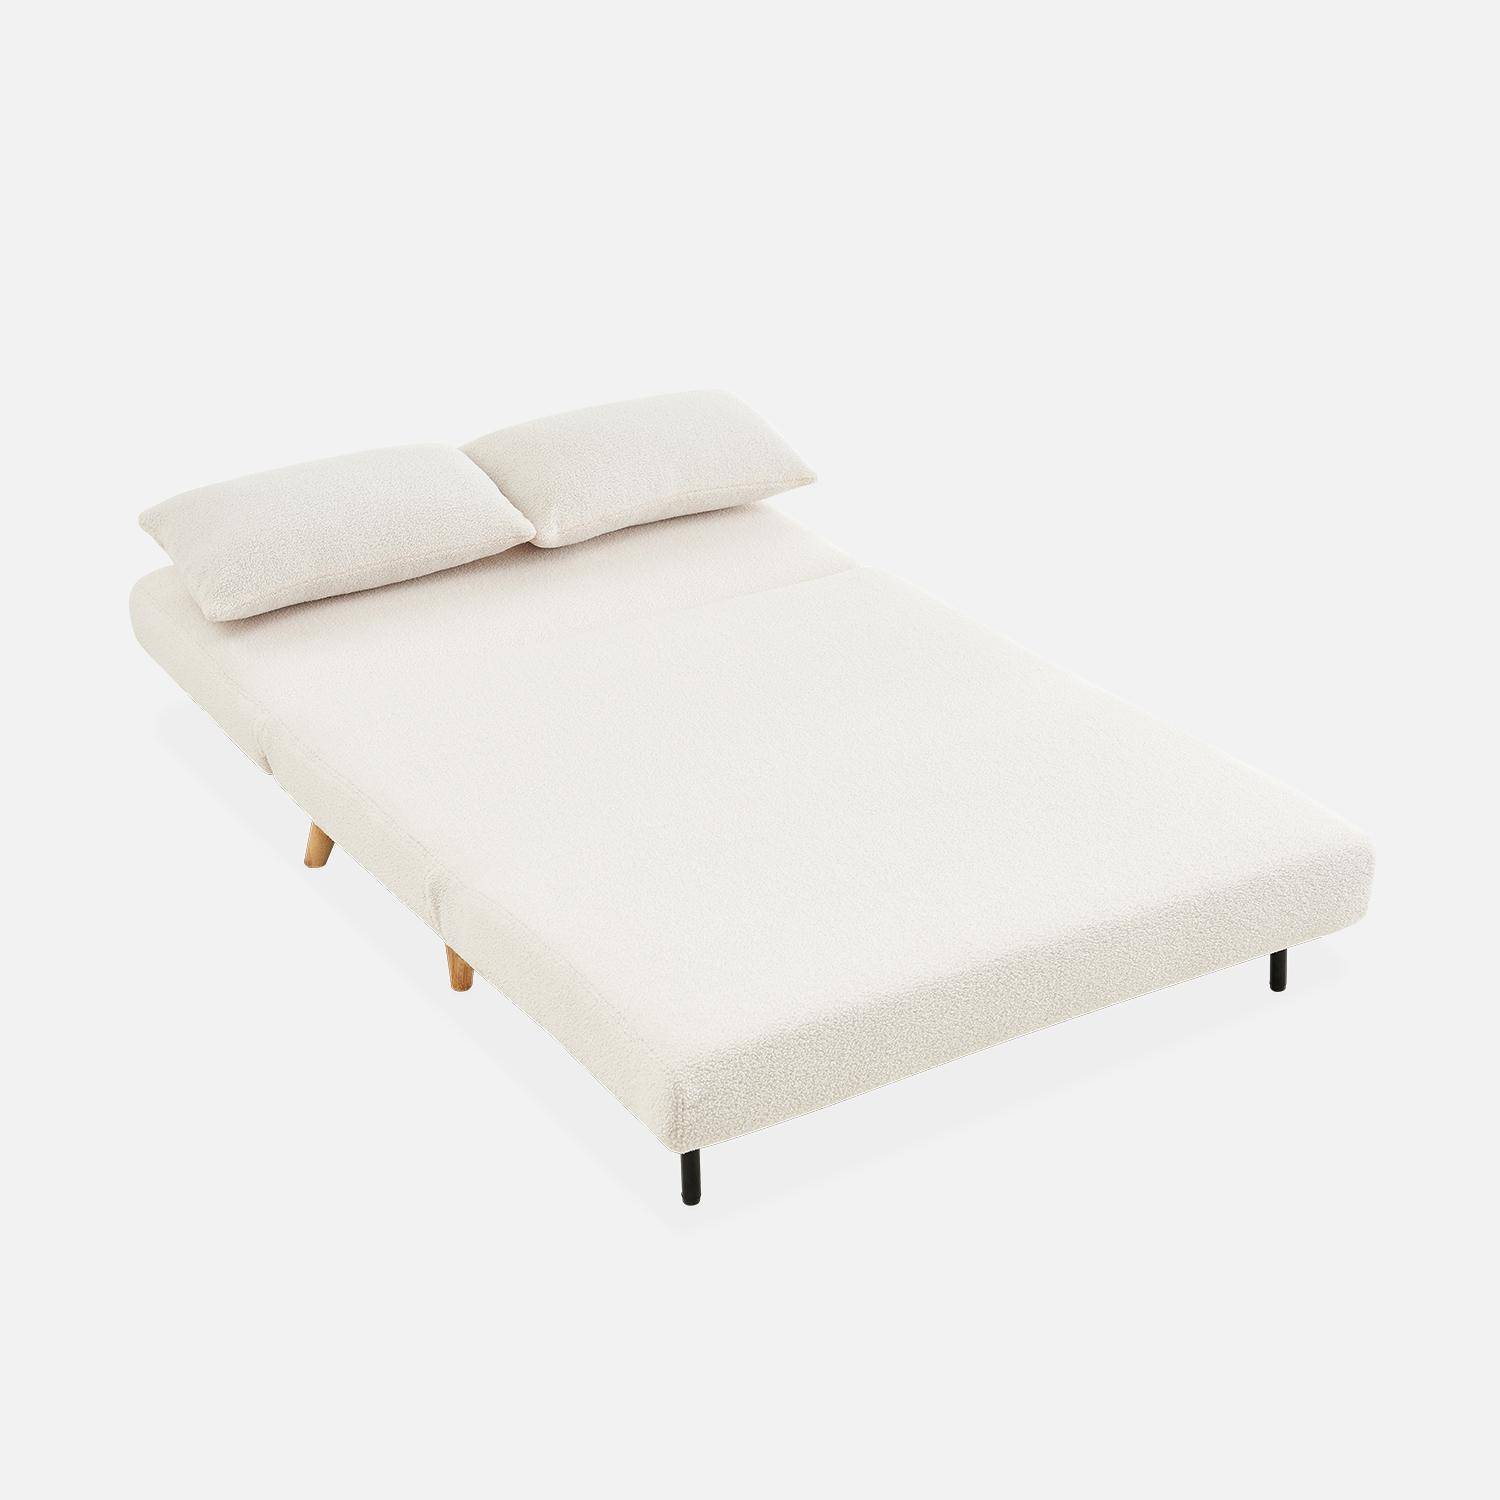 Sleeper, 2-Seater Convertible Sofa with Wooden Legs,  L120xW81xH82cm, white bouclette,sweeek,Photo7